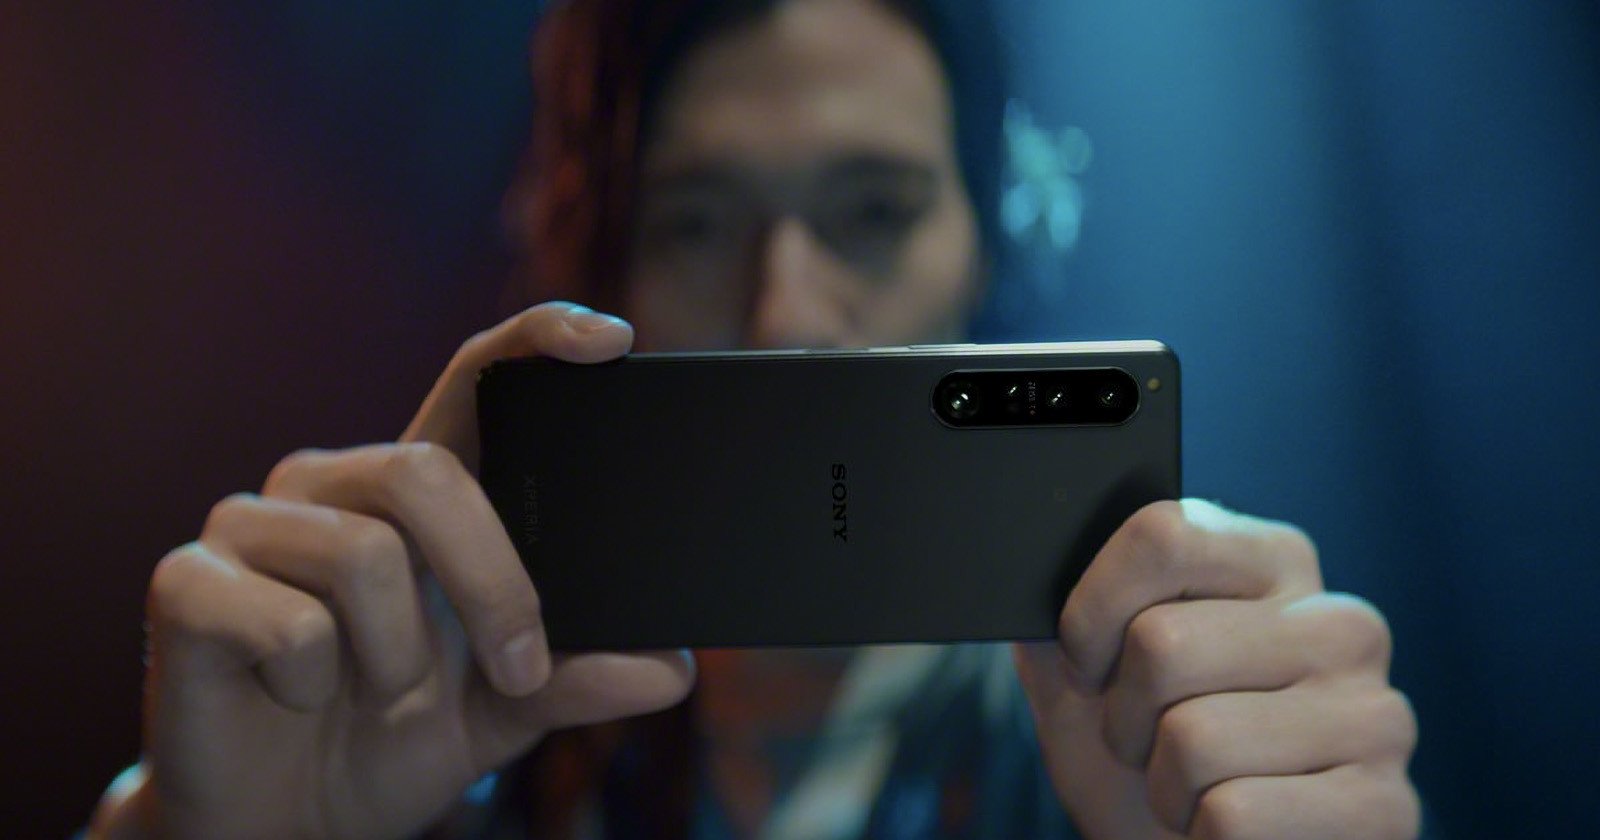 Sony’s Xperia 1 IV is the World’s First Smartphone with True Optical Zoom